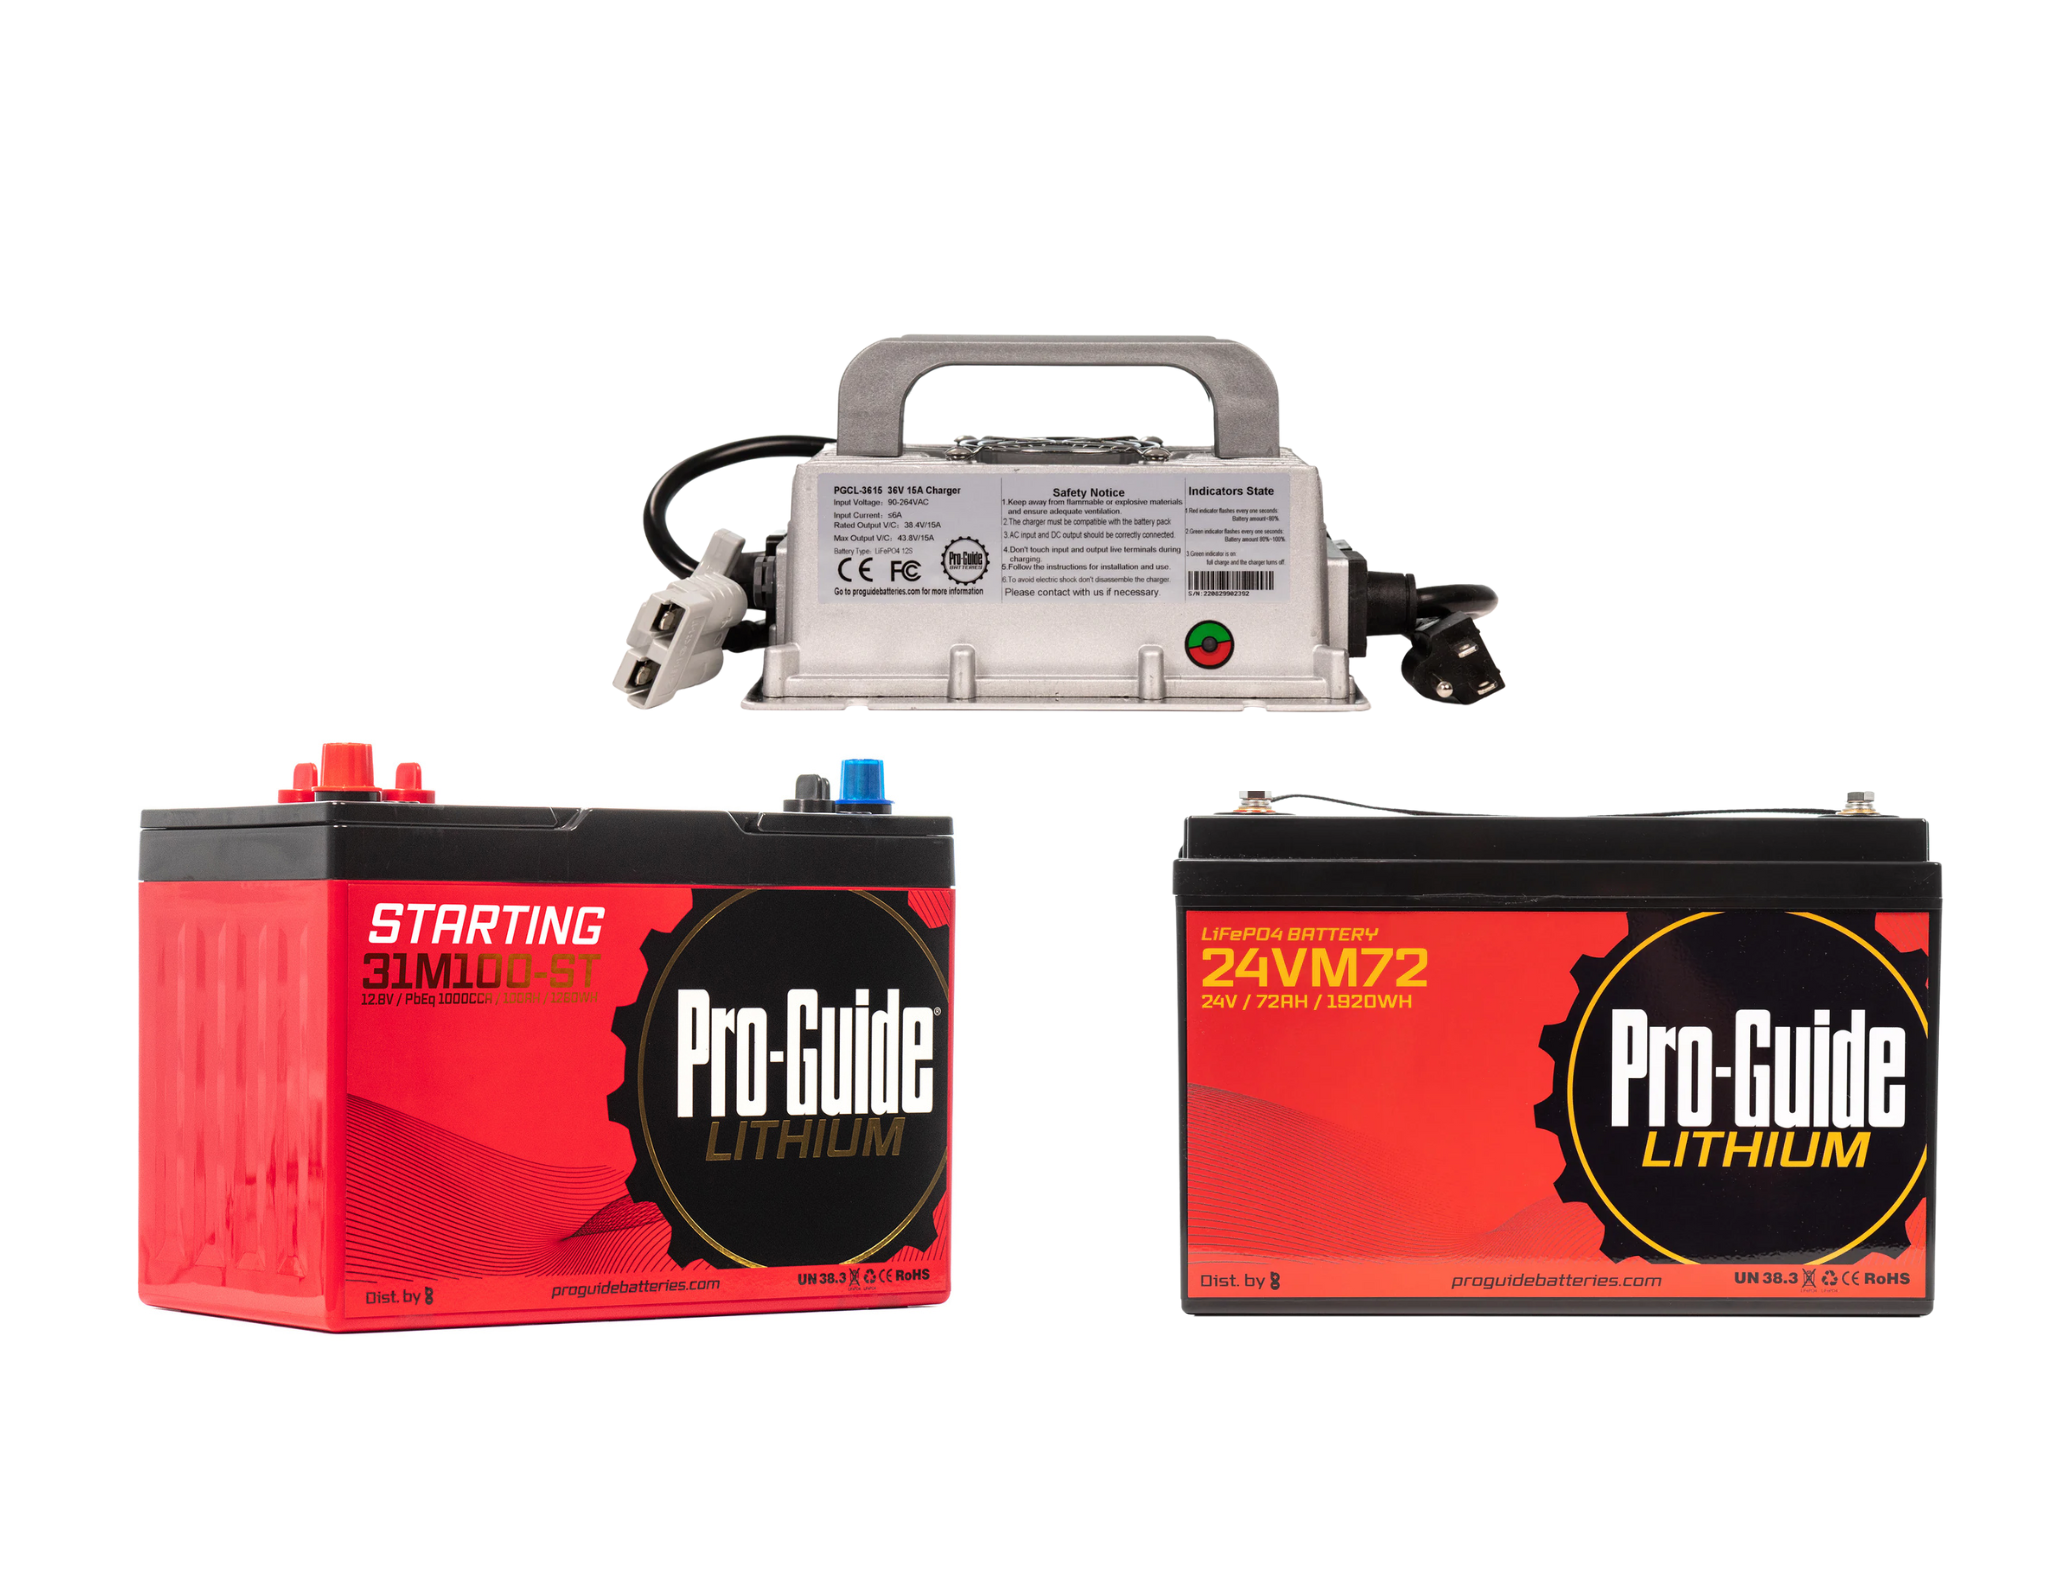 Pro-Guide Lithium Starting & 24V All Day Bundle